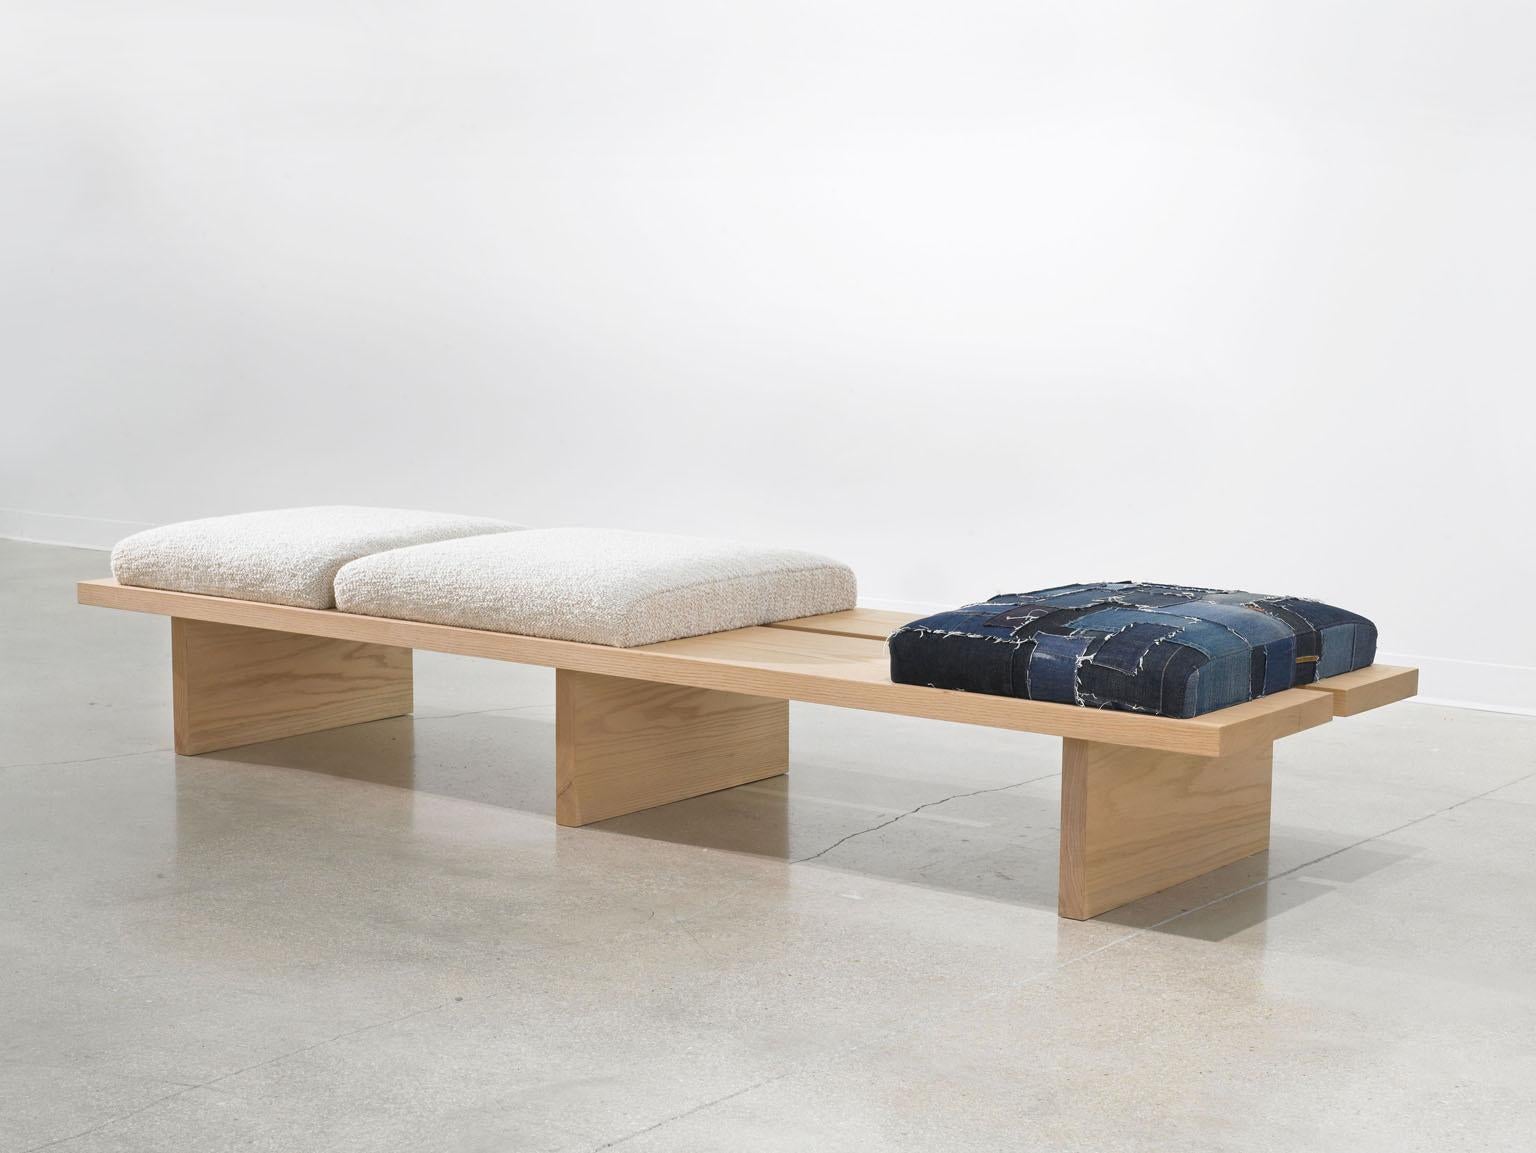 The 'Heroes Bench' was inspired by the clean solid oak planks and designed to emphasize the beauty and simplicity of the materials nature. The adjustable seat cushions are upholstered in Natural Bouclé made by David S Gibson custom weavers and a